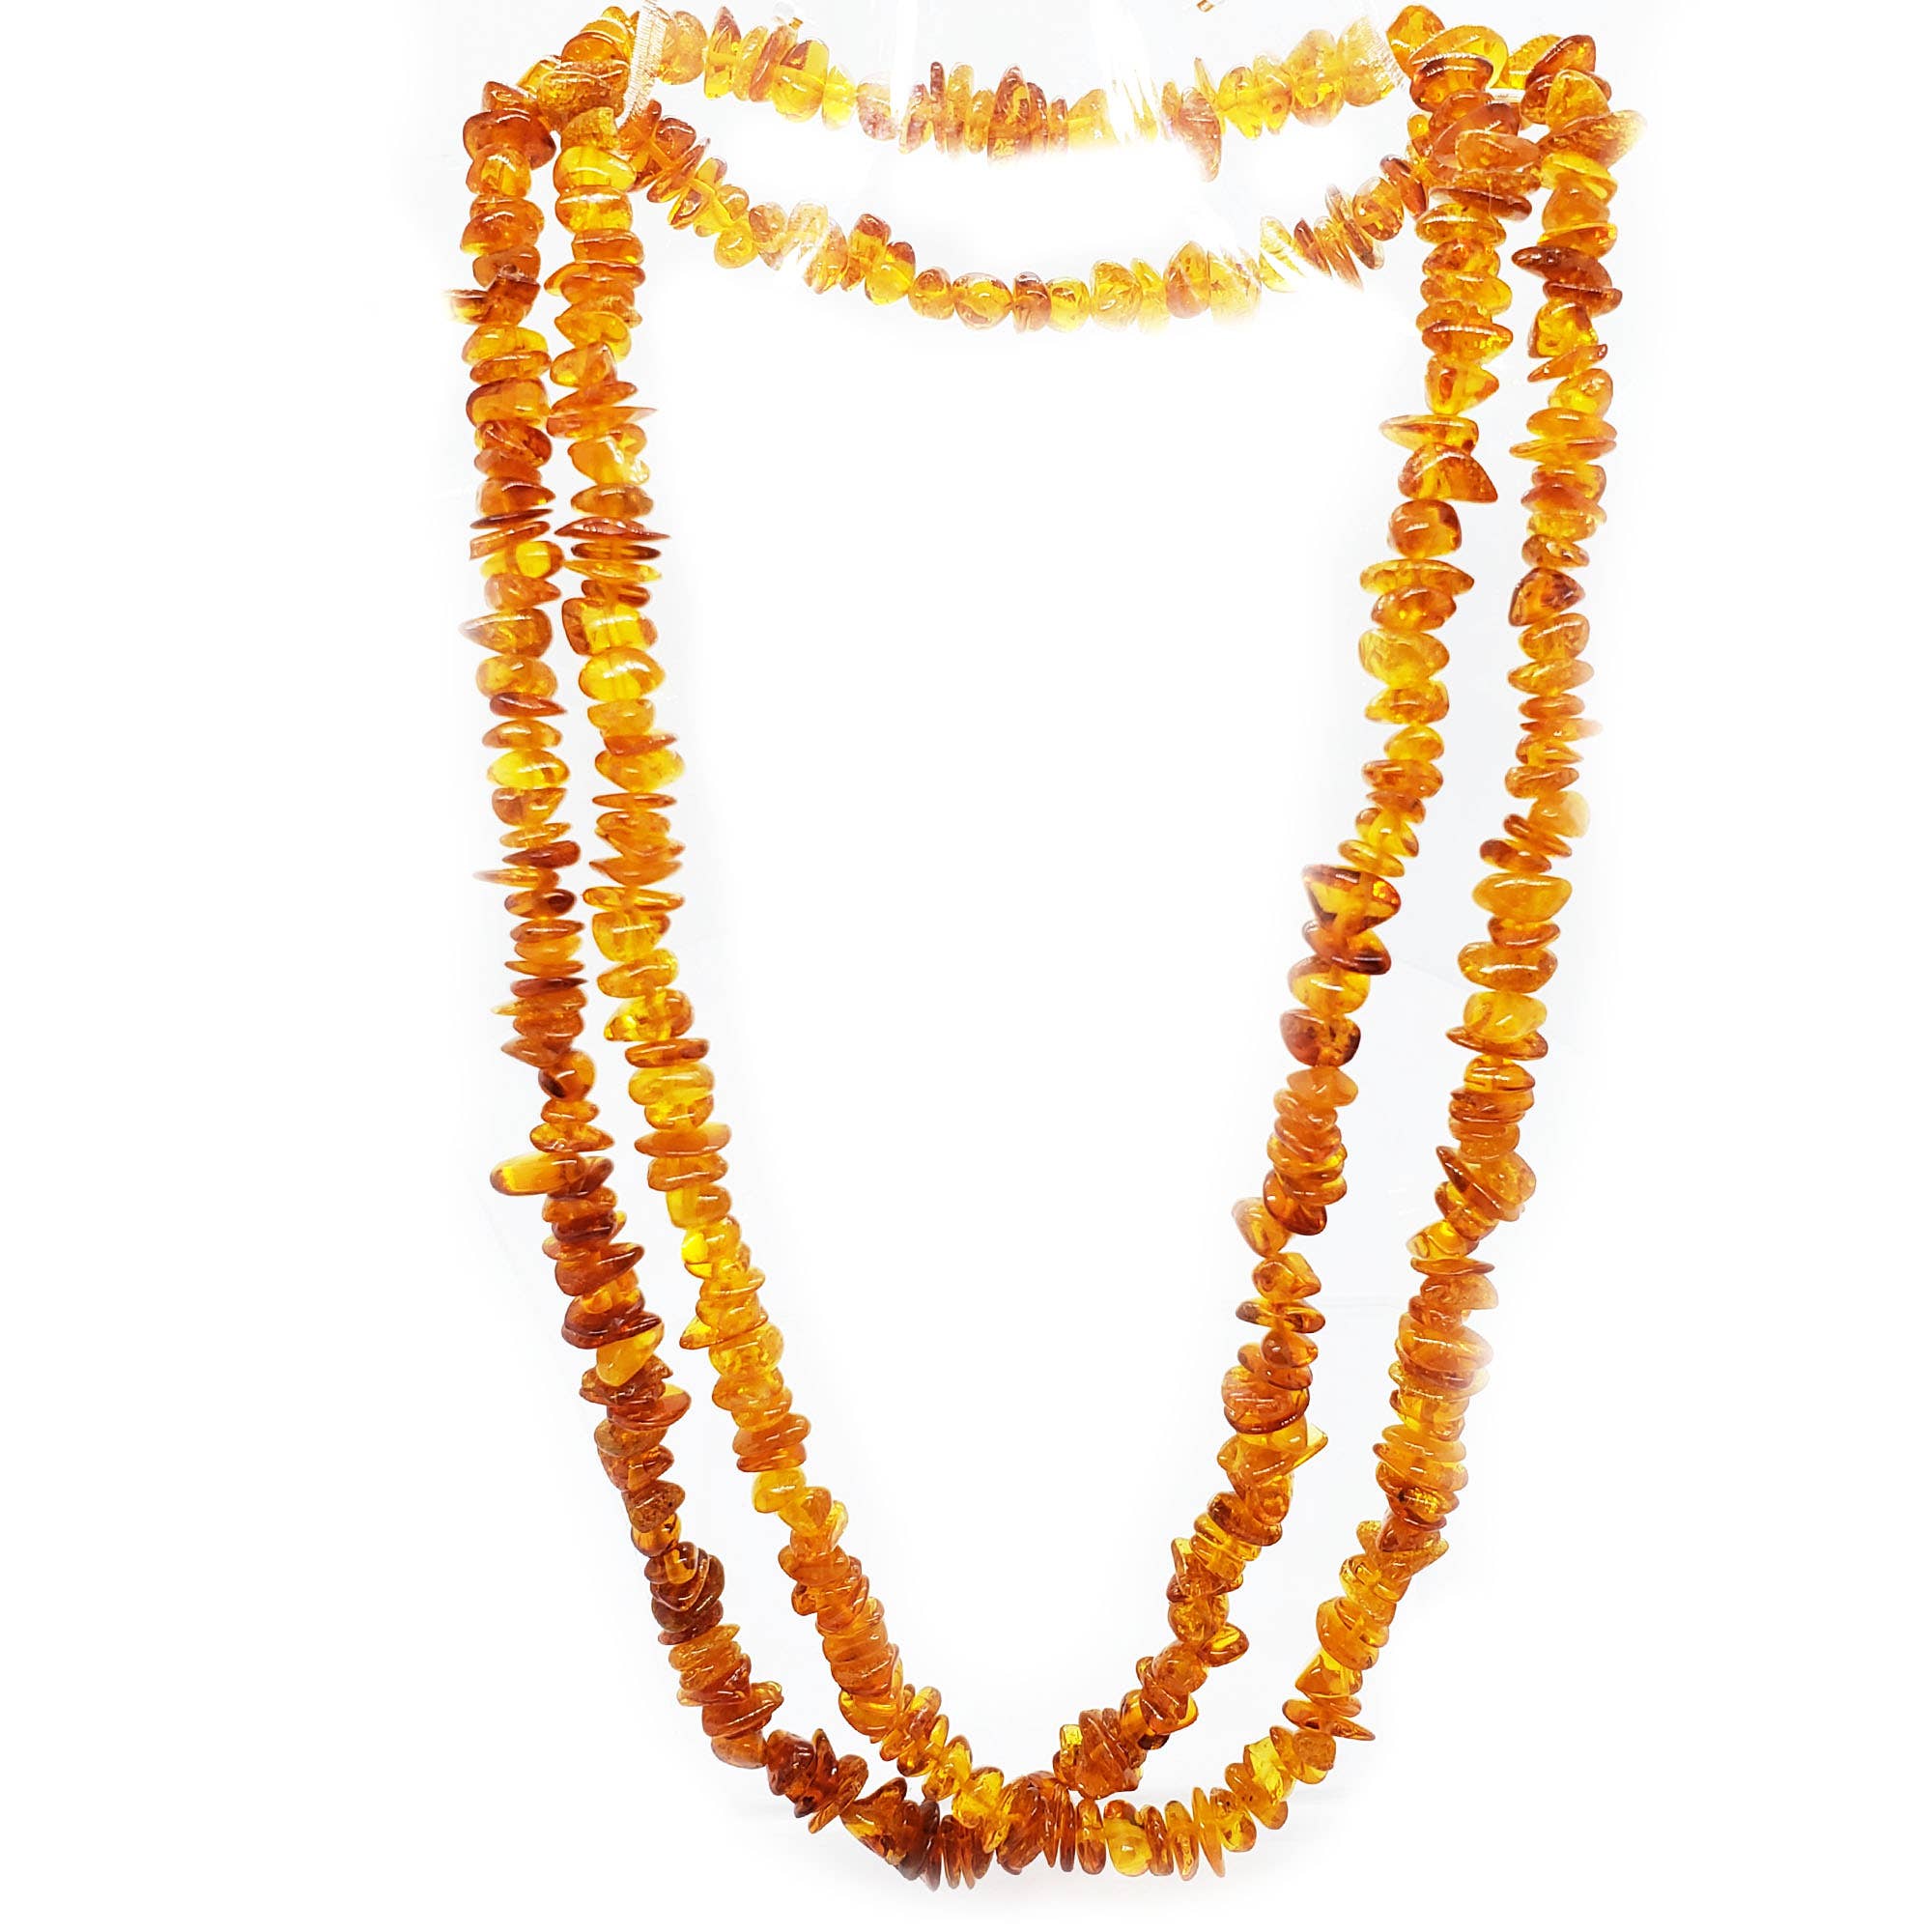 Cognac Amber Chips Necklace 32″ - Spiral Circle